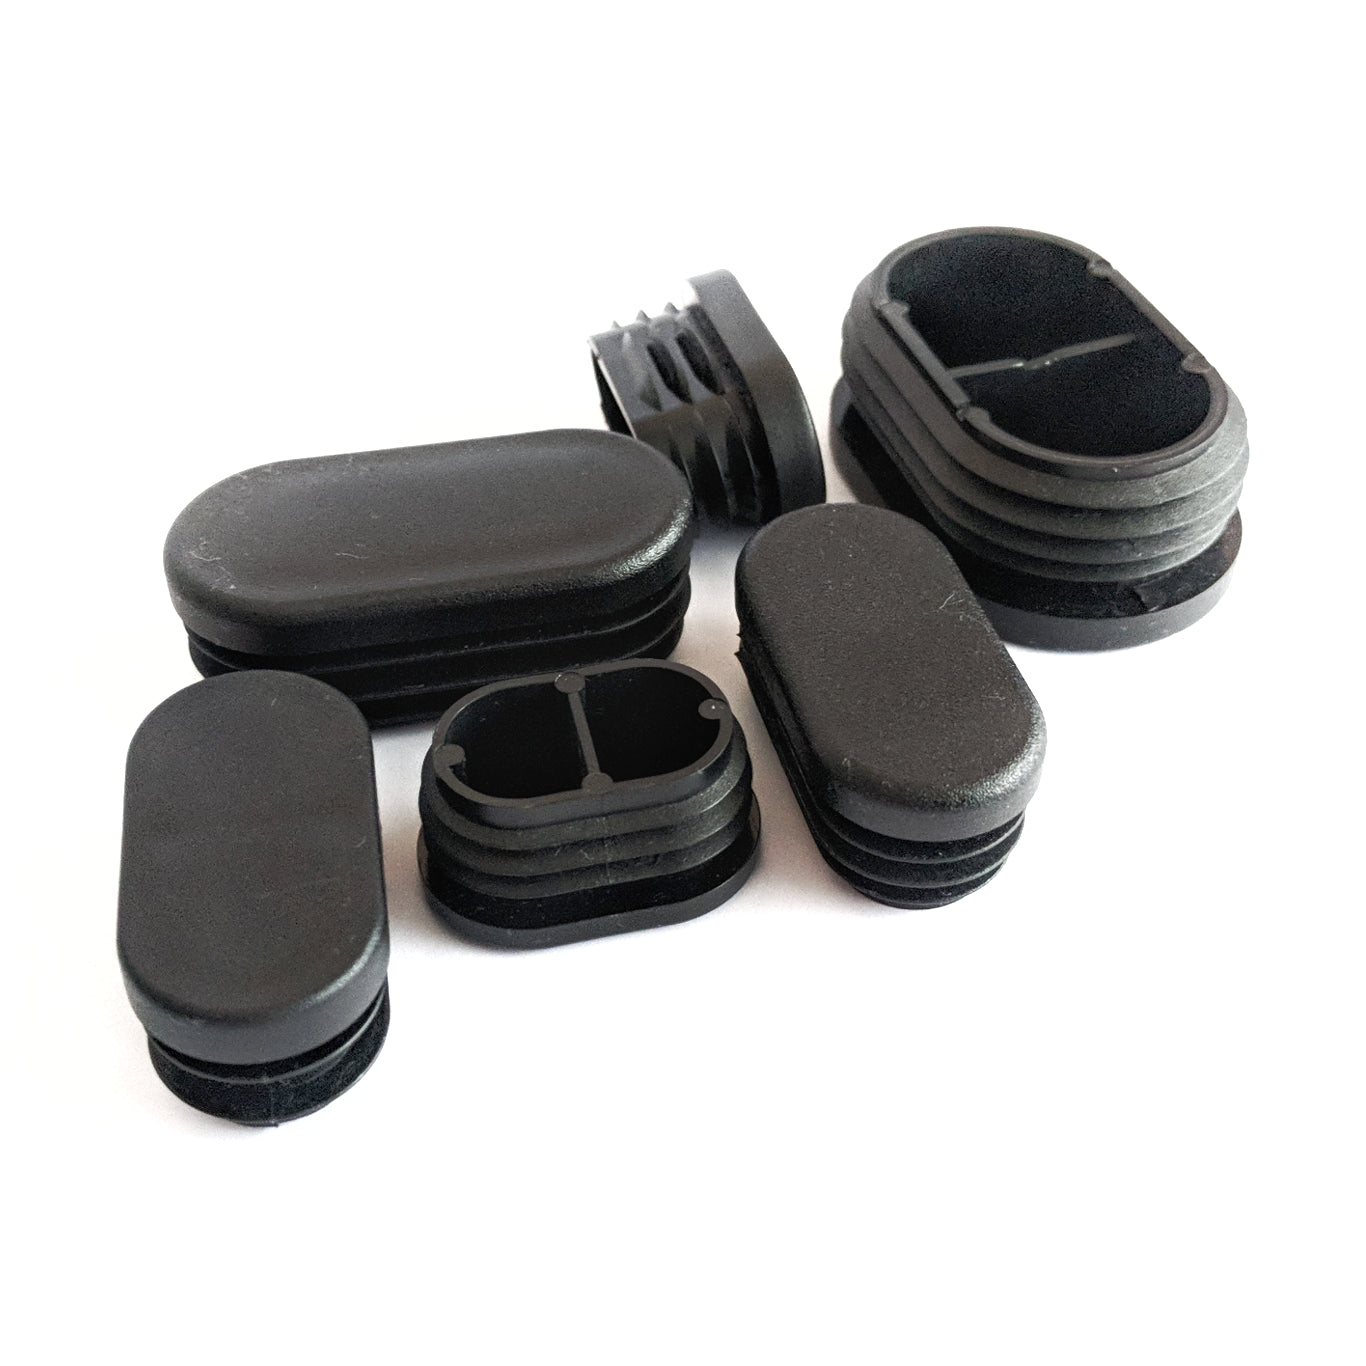 Oval Tube Inserts 30mm x 20mm | Made in Germany | Keay Vital Parts - Keay Vital Parts